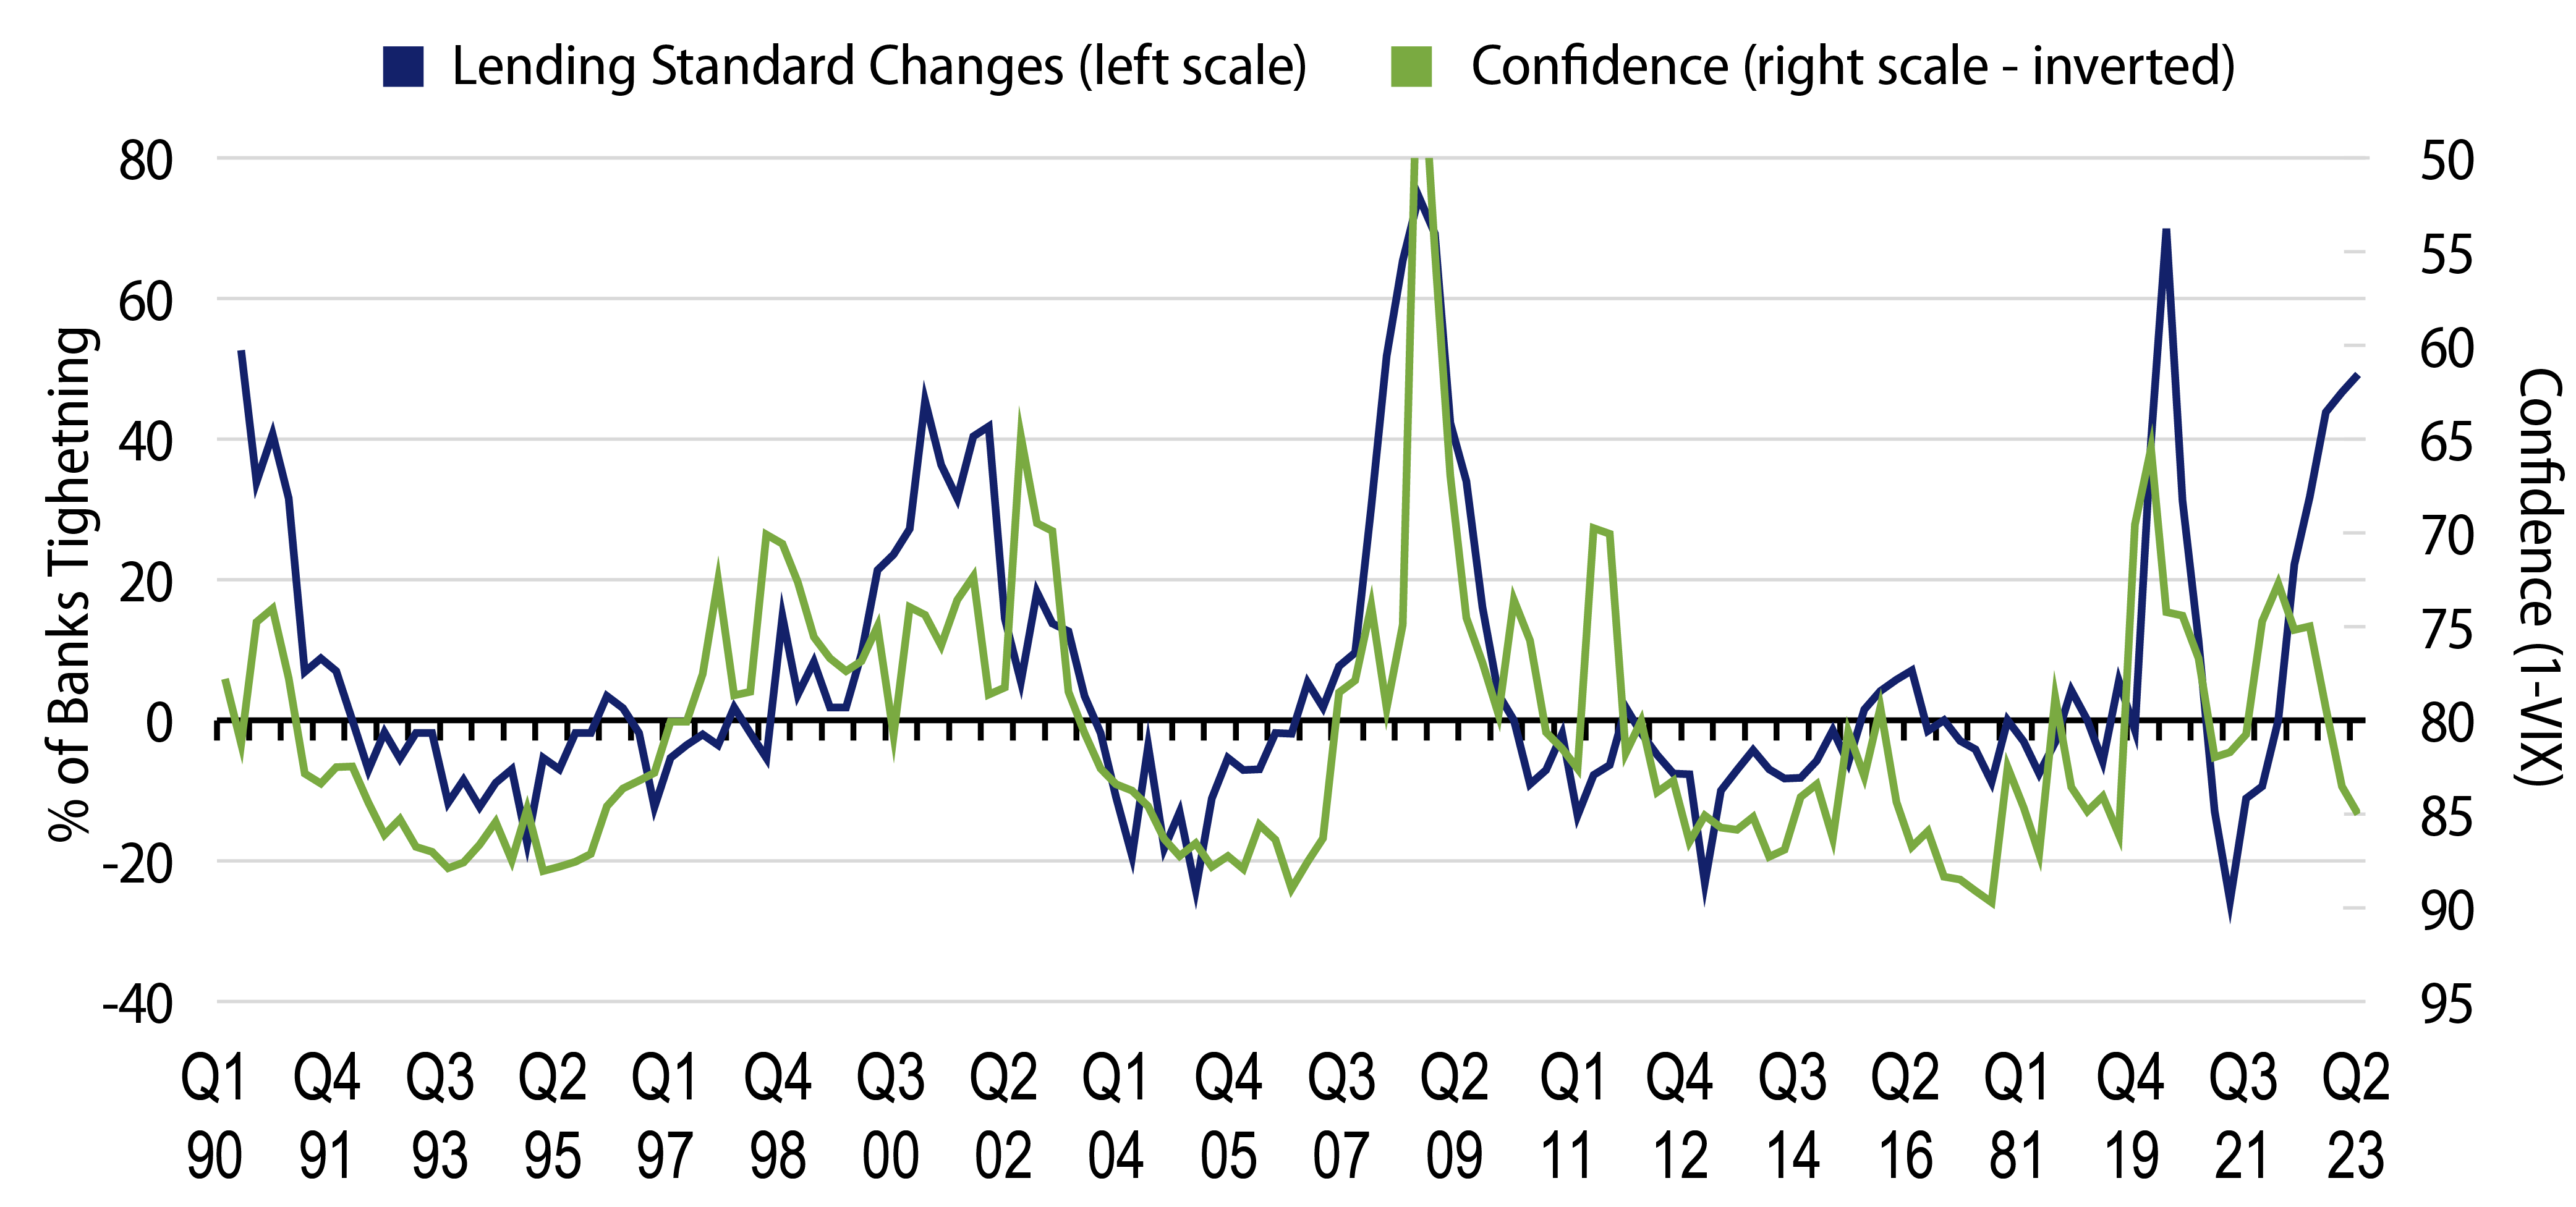 Implied Confidence Is Relatively High Despite Banks’ Tighter Standards